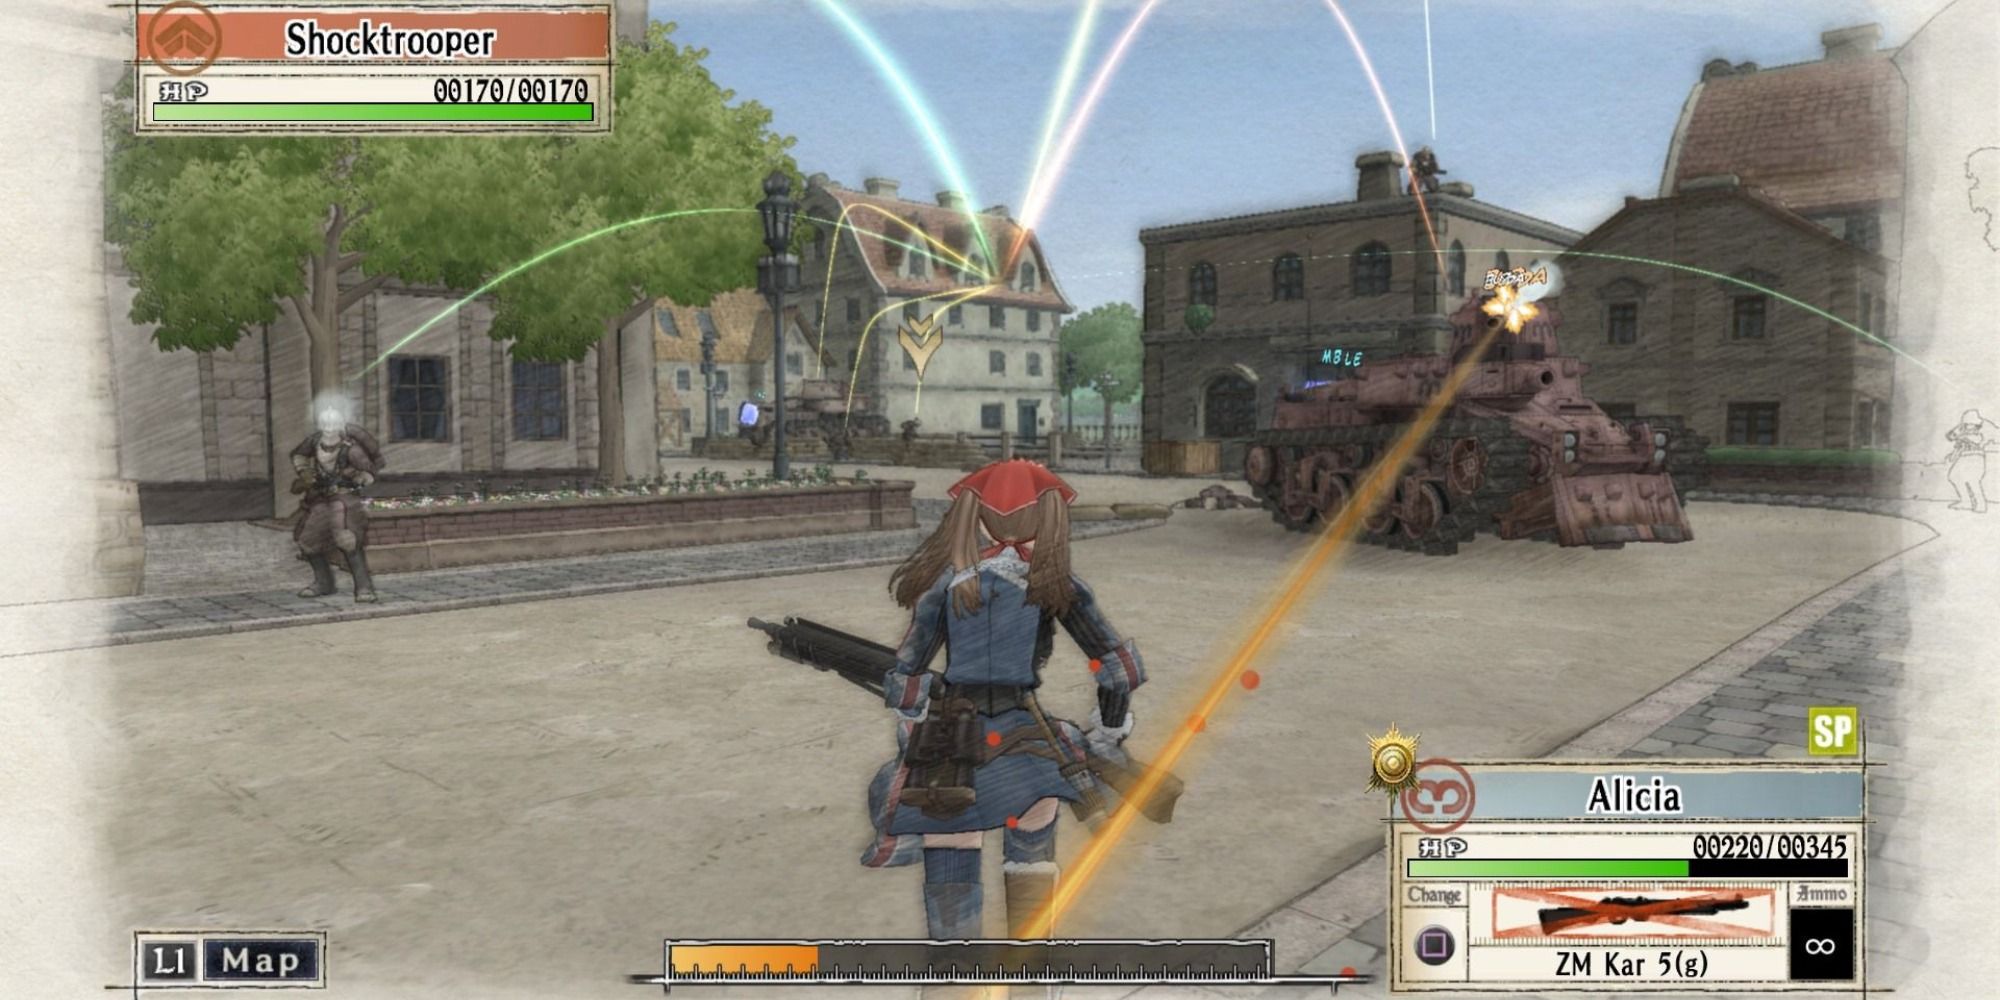 Valkyria Chronicles: Showing the movement during a character's turn in battle.